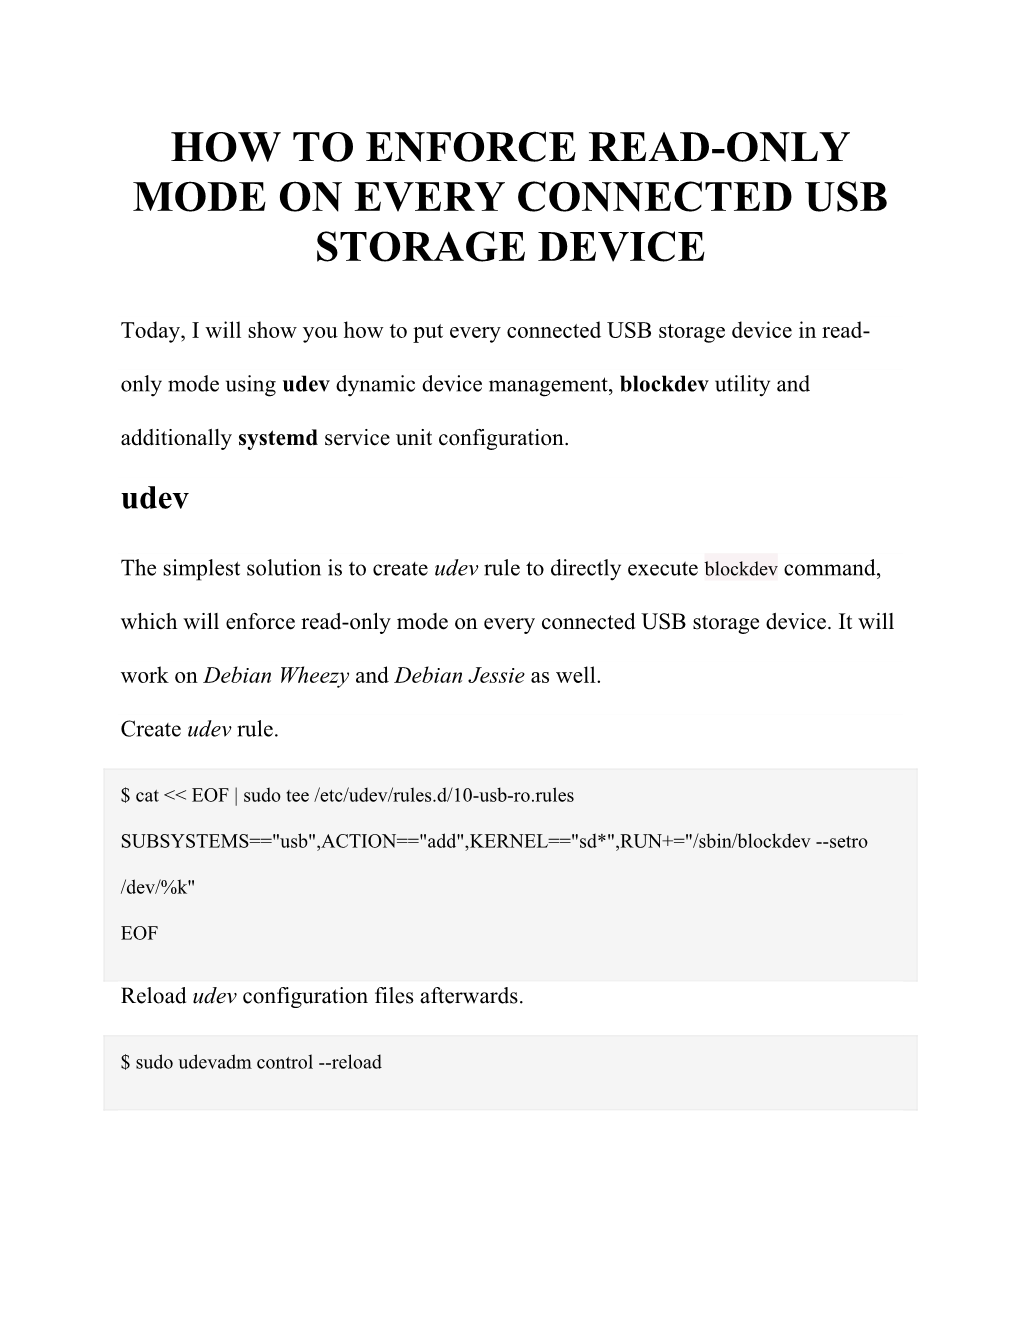 How to Enforce Read-Only Mode on Every Connected Usb Storage Device